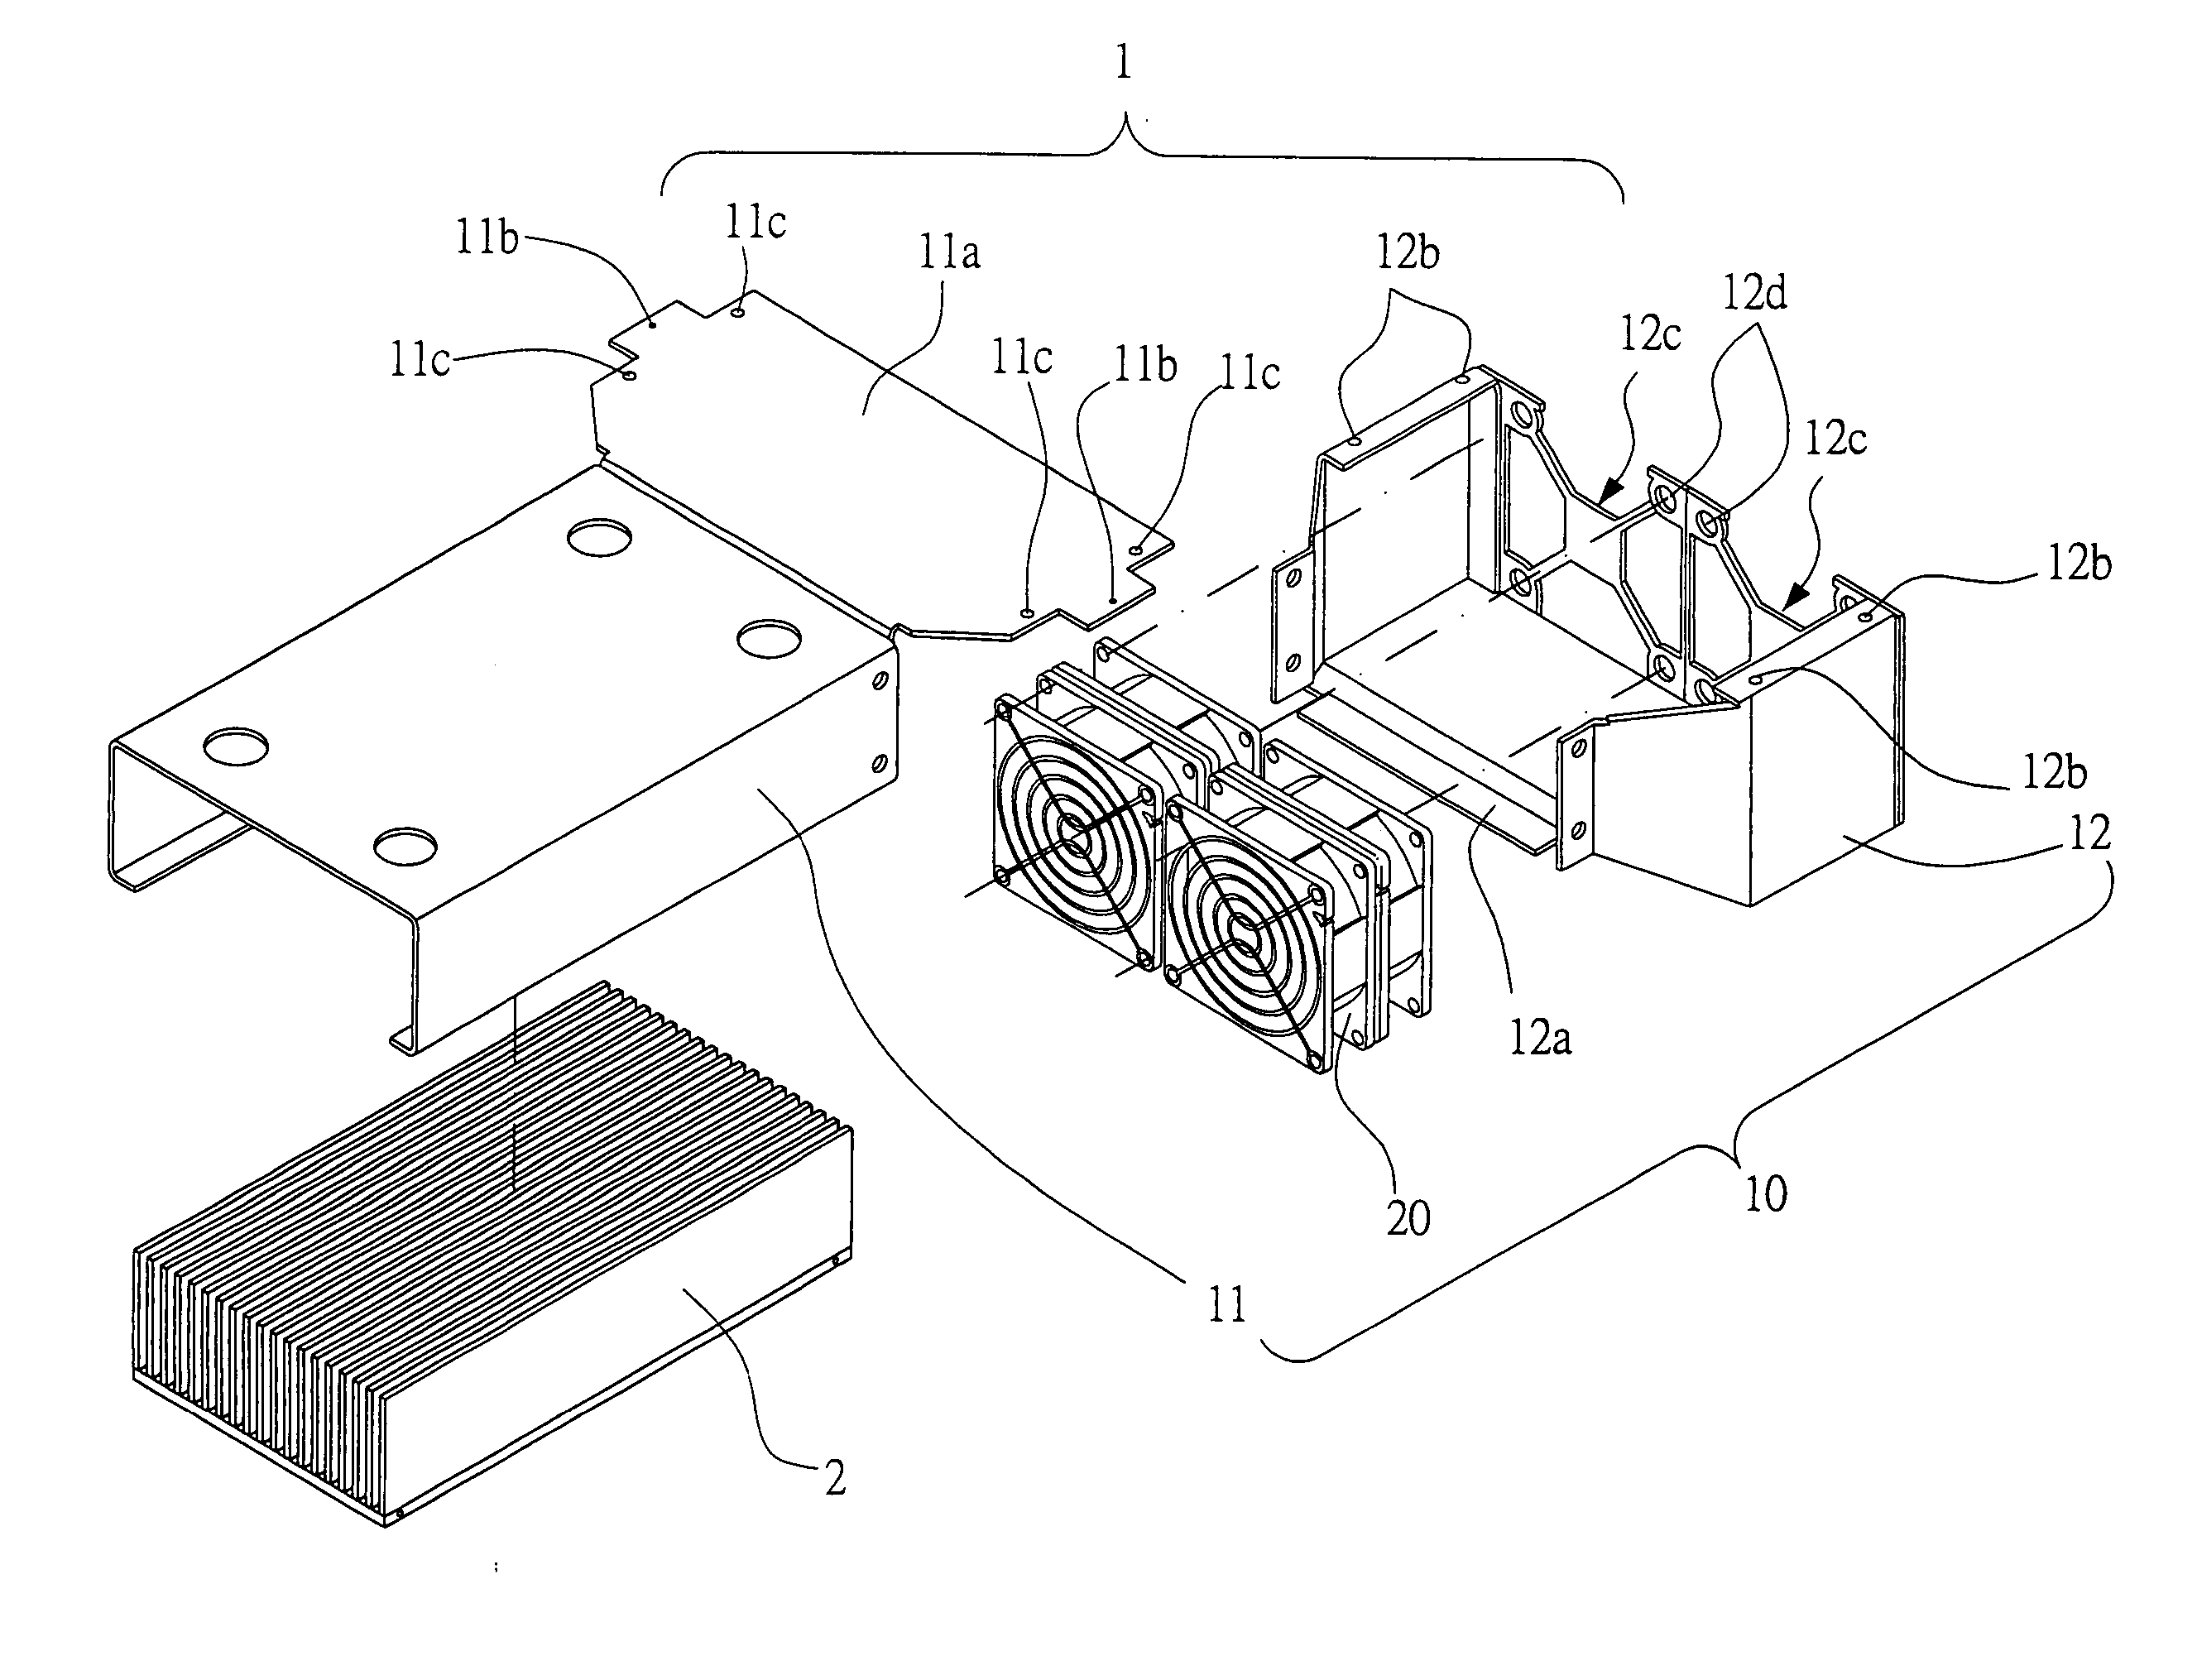 Fan cover heat dissipation assembly for a host computer CPU